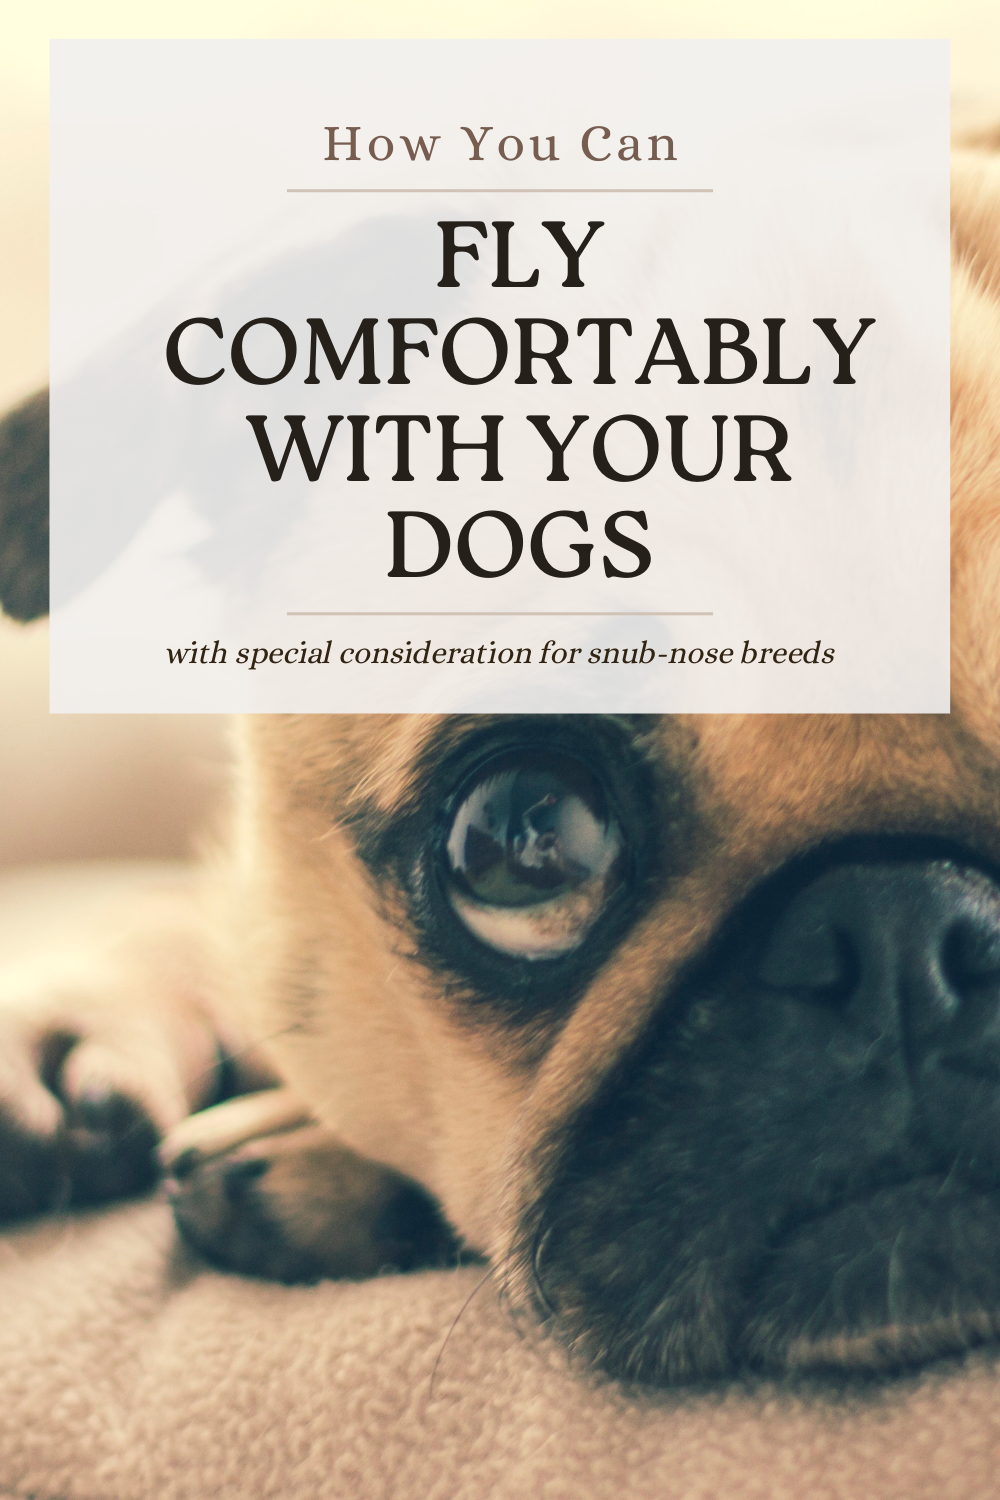 A Guide to Flying Comfortably with Your Dogs